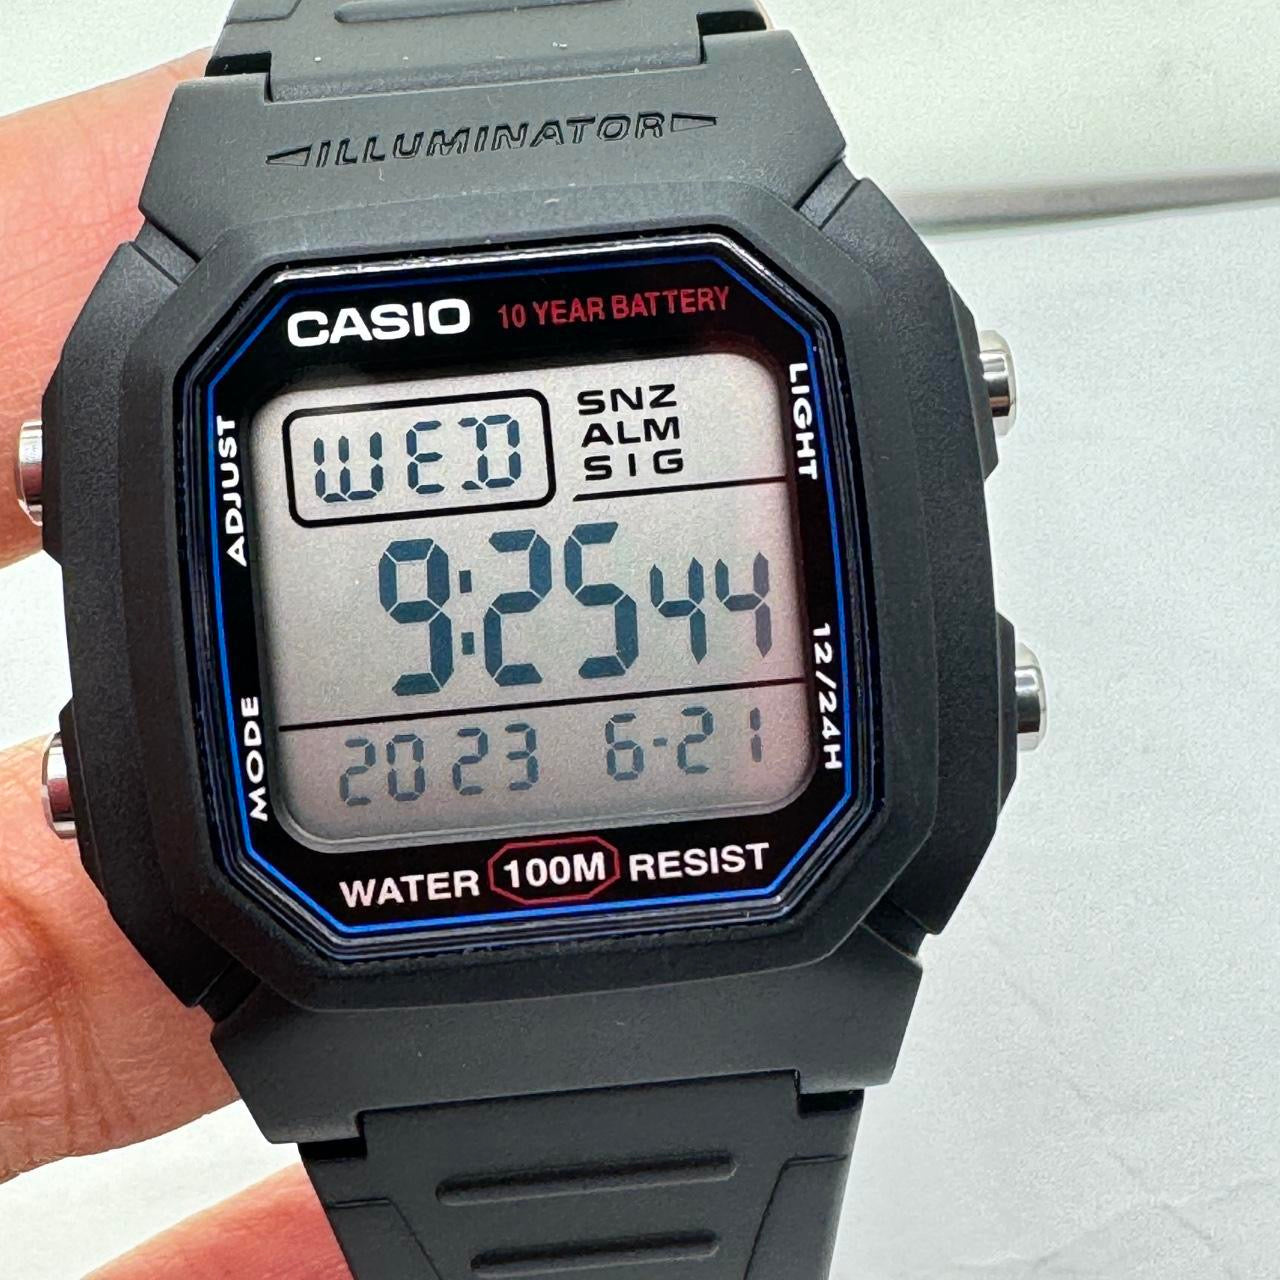 CASIO SPORTS WATCH&nbsp; FOR UNISEX SIZE , FOR MEN, LADIES&nbsp; OR FOR TEEN&nbsp;  34 MM DIAMETER CASUAL WORK OR DAILY WATCH&nbsp;  BRAND NEW ITEM&nbsp;  9 INCHES ROUND LONG&nbsp;  NEW ITEM , NEW BATTERY , LIGHT, TIMER, STOP WATCH&nbsp;